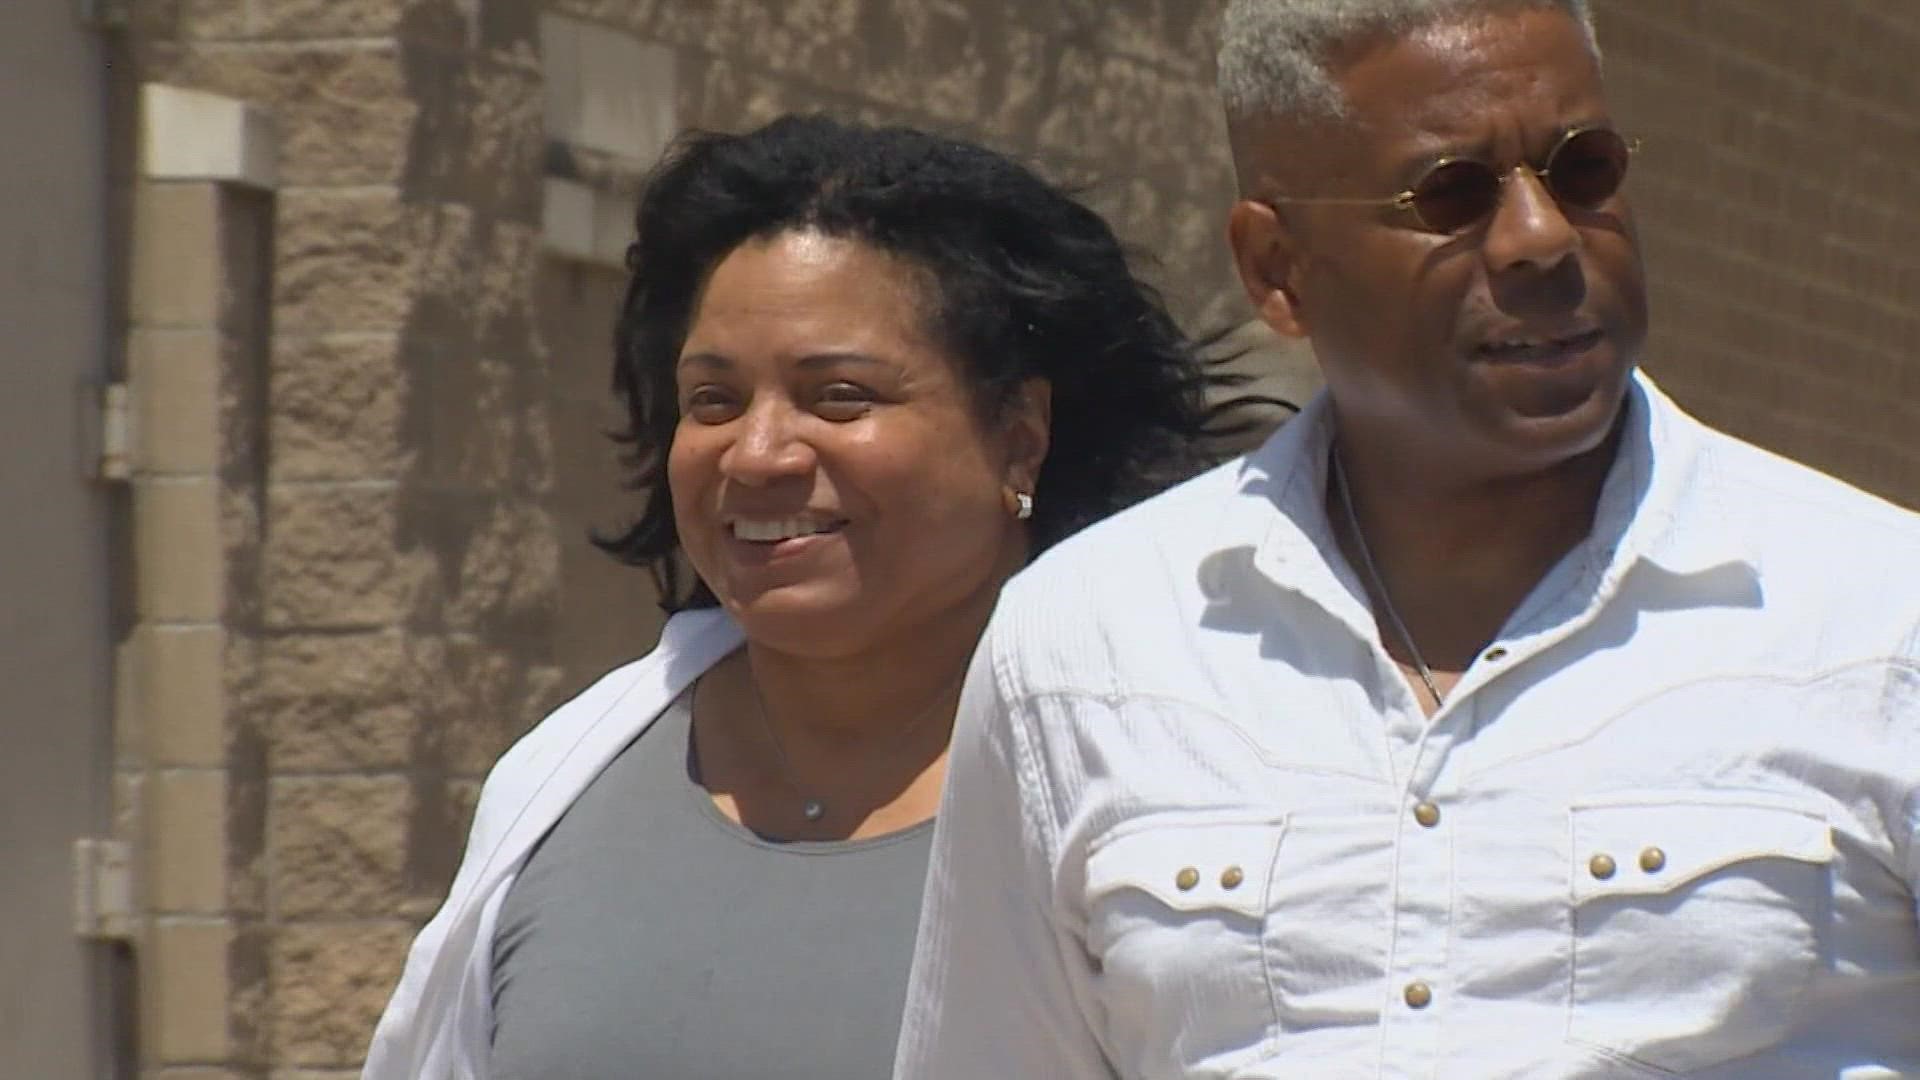 Allen West, the former Texas Republican Party chairman, said in an Instagram video Saturday morning that his wife had not been drinking.